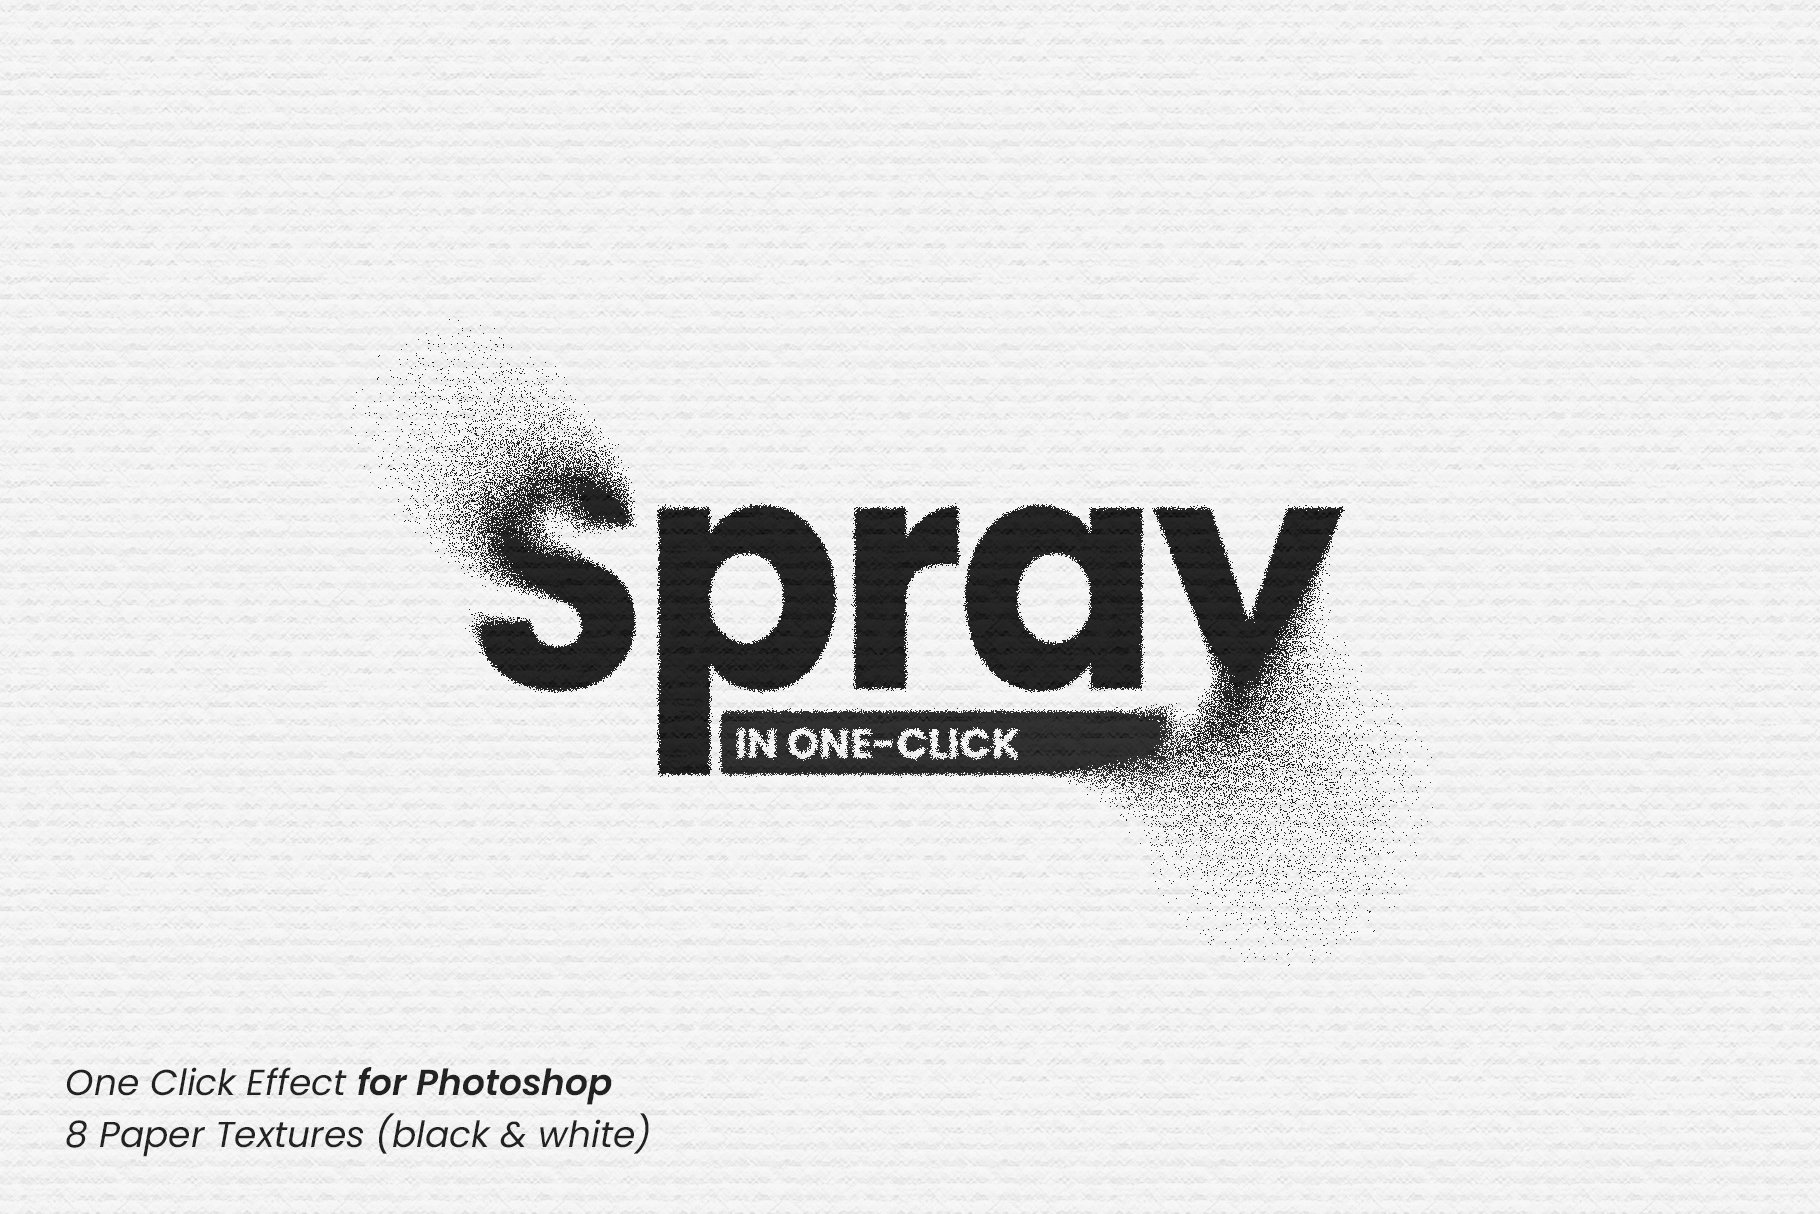 Spray Paint Photoshop Action, Add-ons